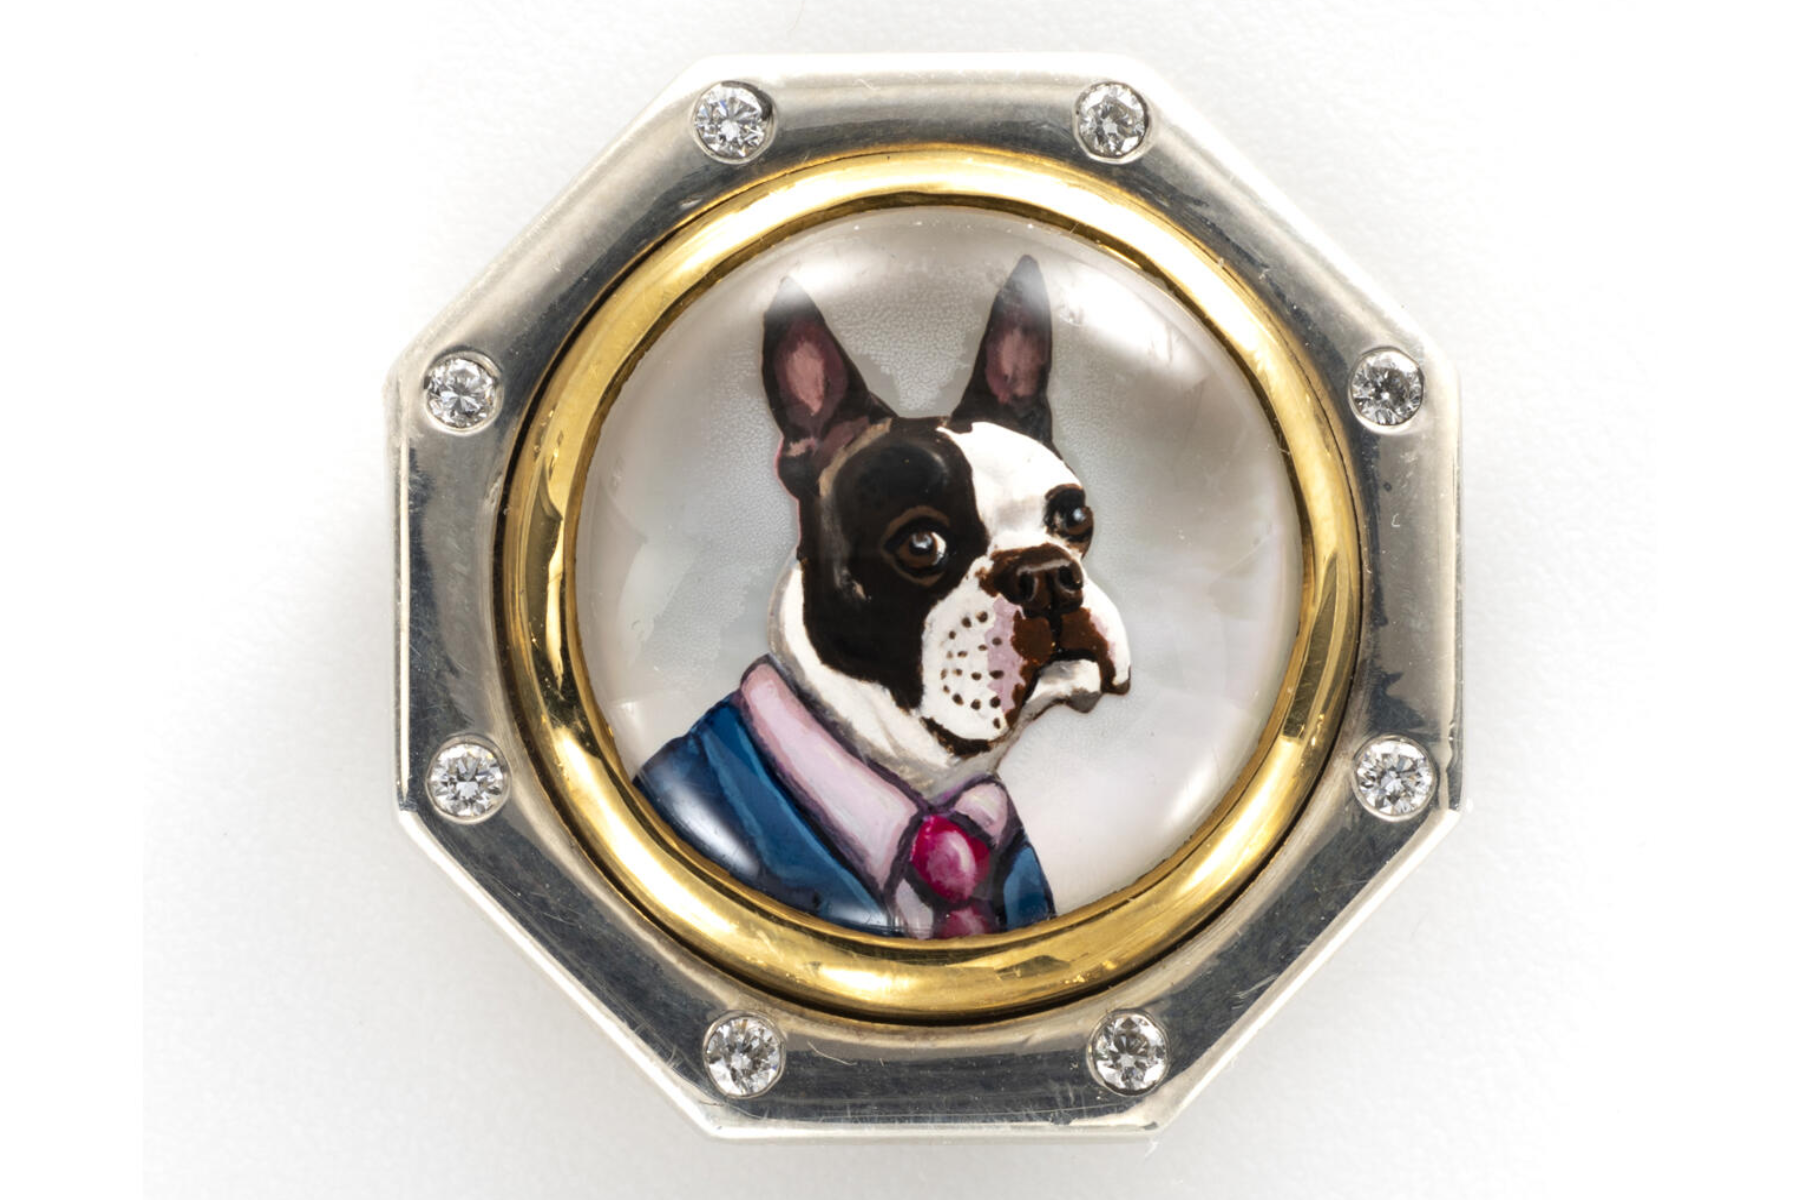 Rémy Rotenier Debuts Hand-Painted Animal Jewelry